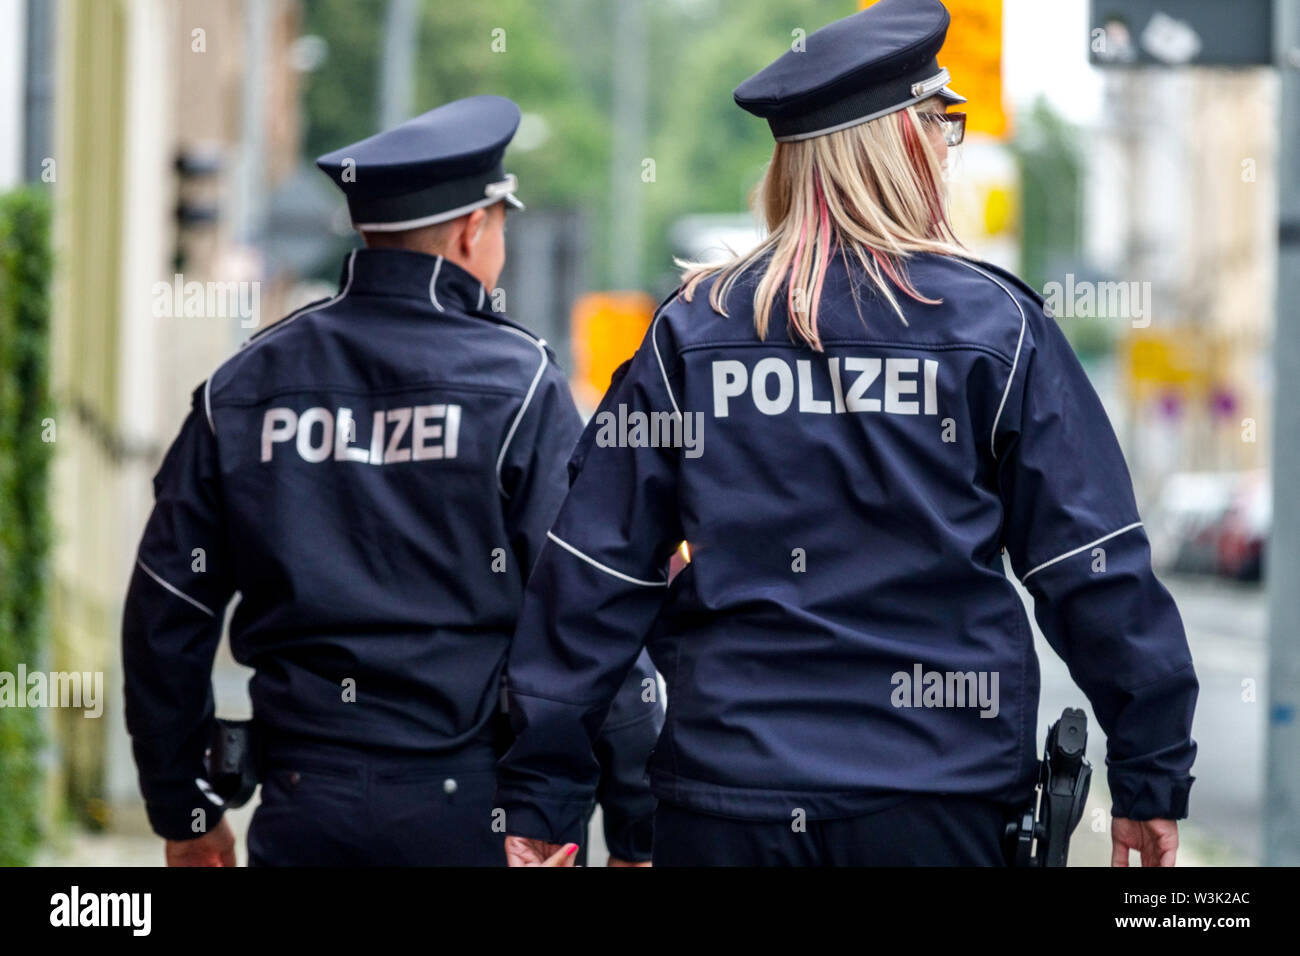 Germany Police Officer woman Two police patrol Germany policeman police officers rear view german policewoman Stock Photo